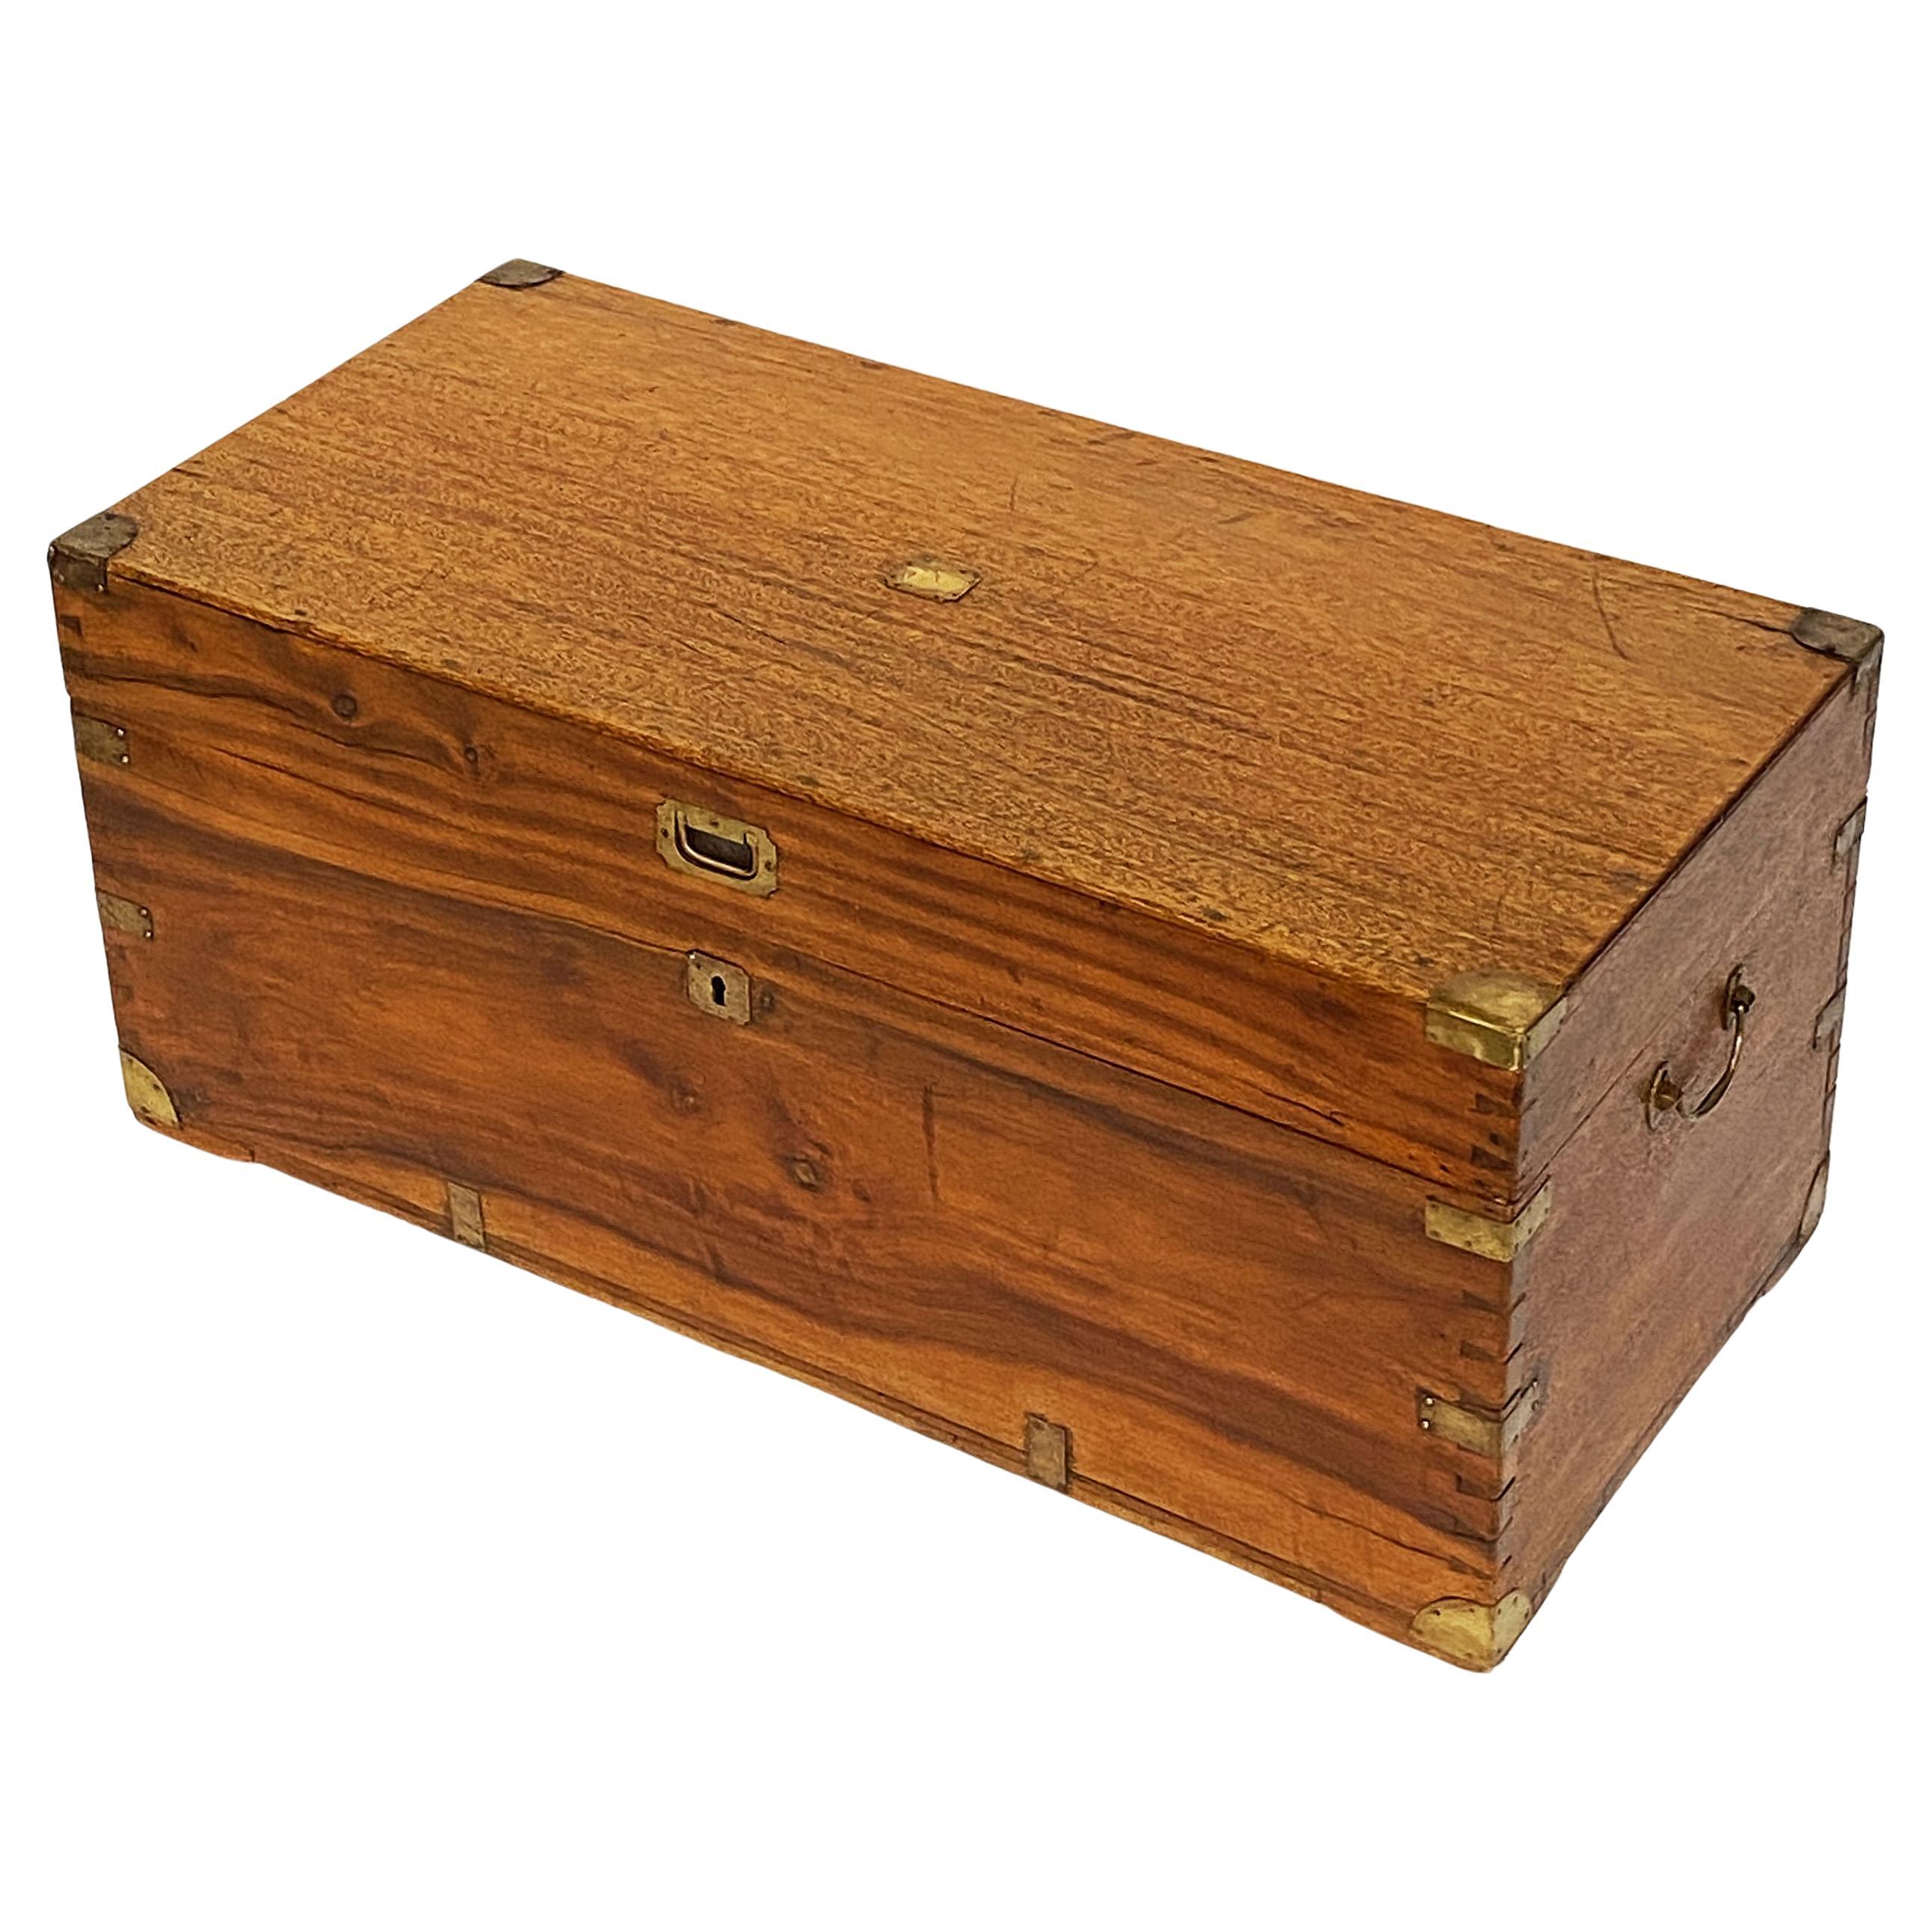 Large British Military Officer's Campaign Trunk of Brass-Bound Camphor For Sale